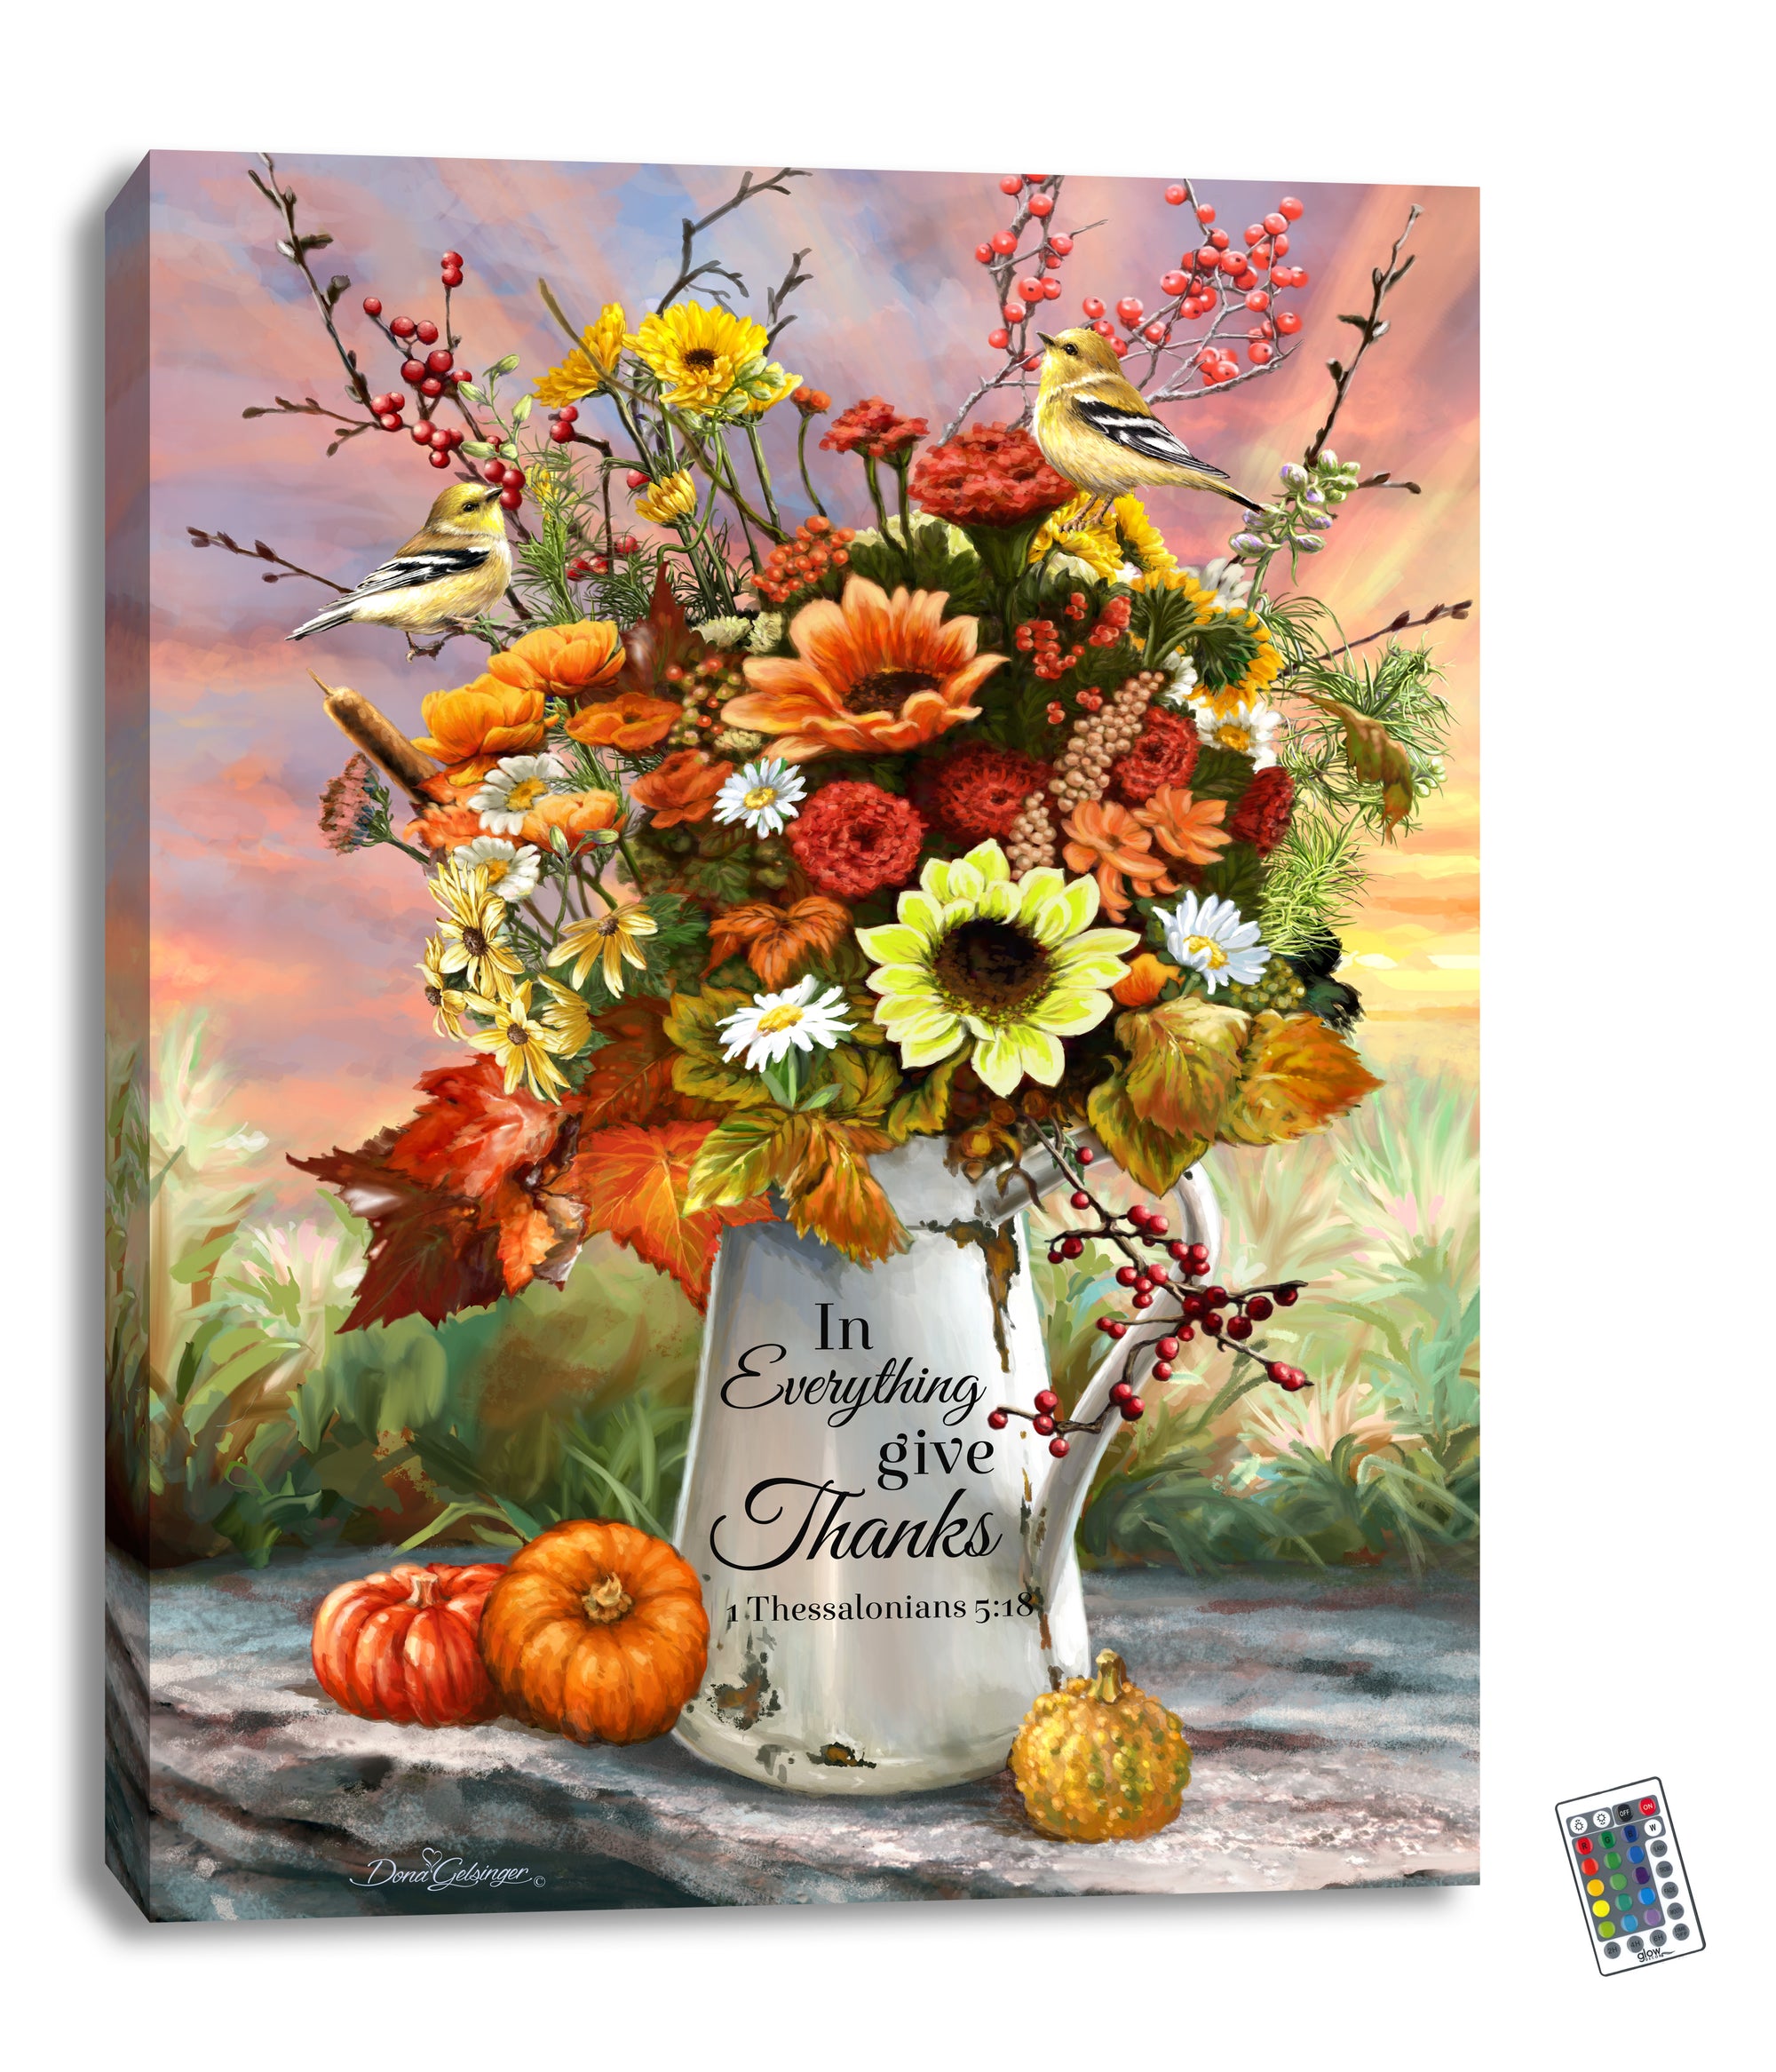  This breathtaking piece features a stunning display of colorful fall-themed flowers and leaves, elegantly arranged in a charming tin watering can. With the scripture "In everything give thanks" from 1 Thessalonians 5:18 beautifully written on the tin, this artwork serves as a reminder to be grateful for all of life's blessings.